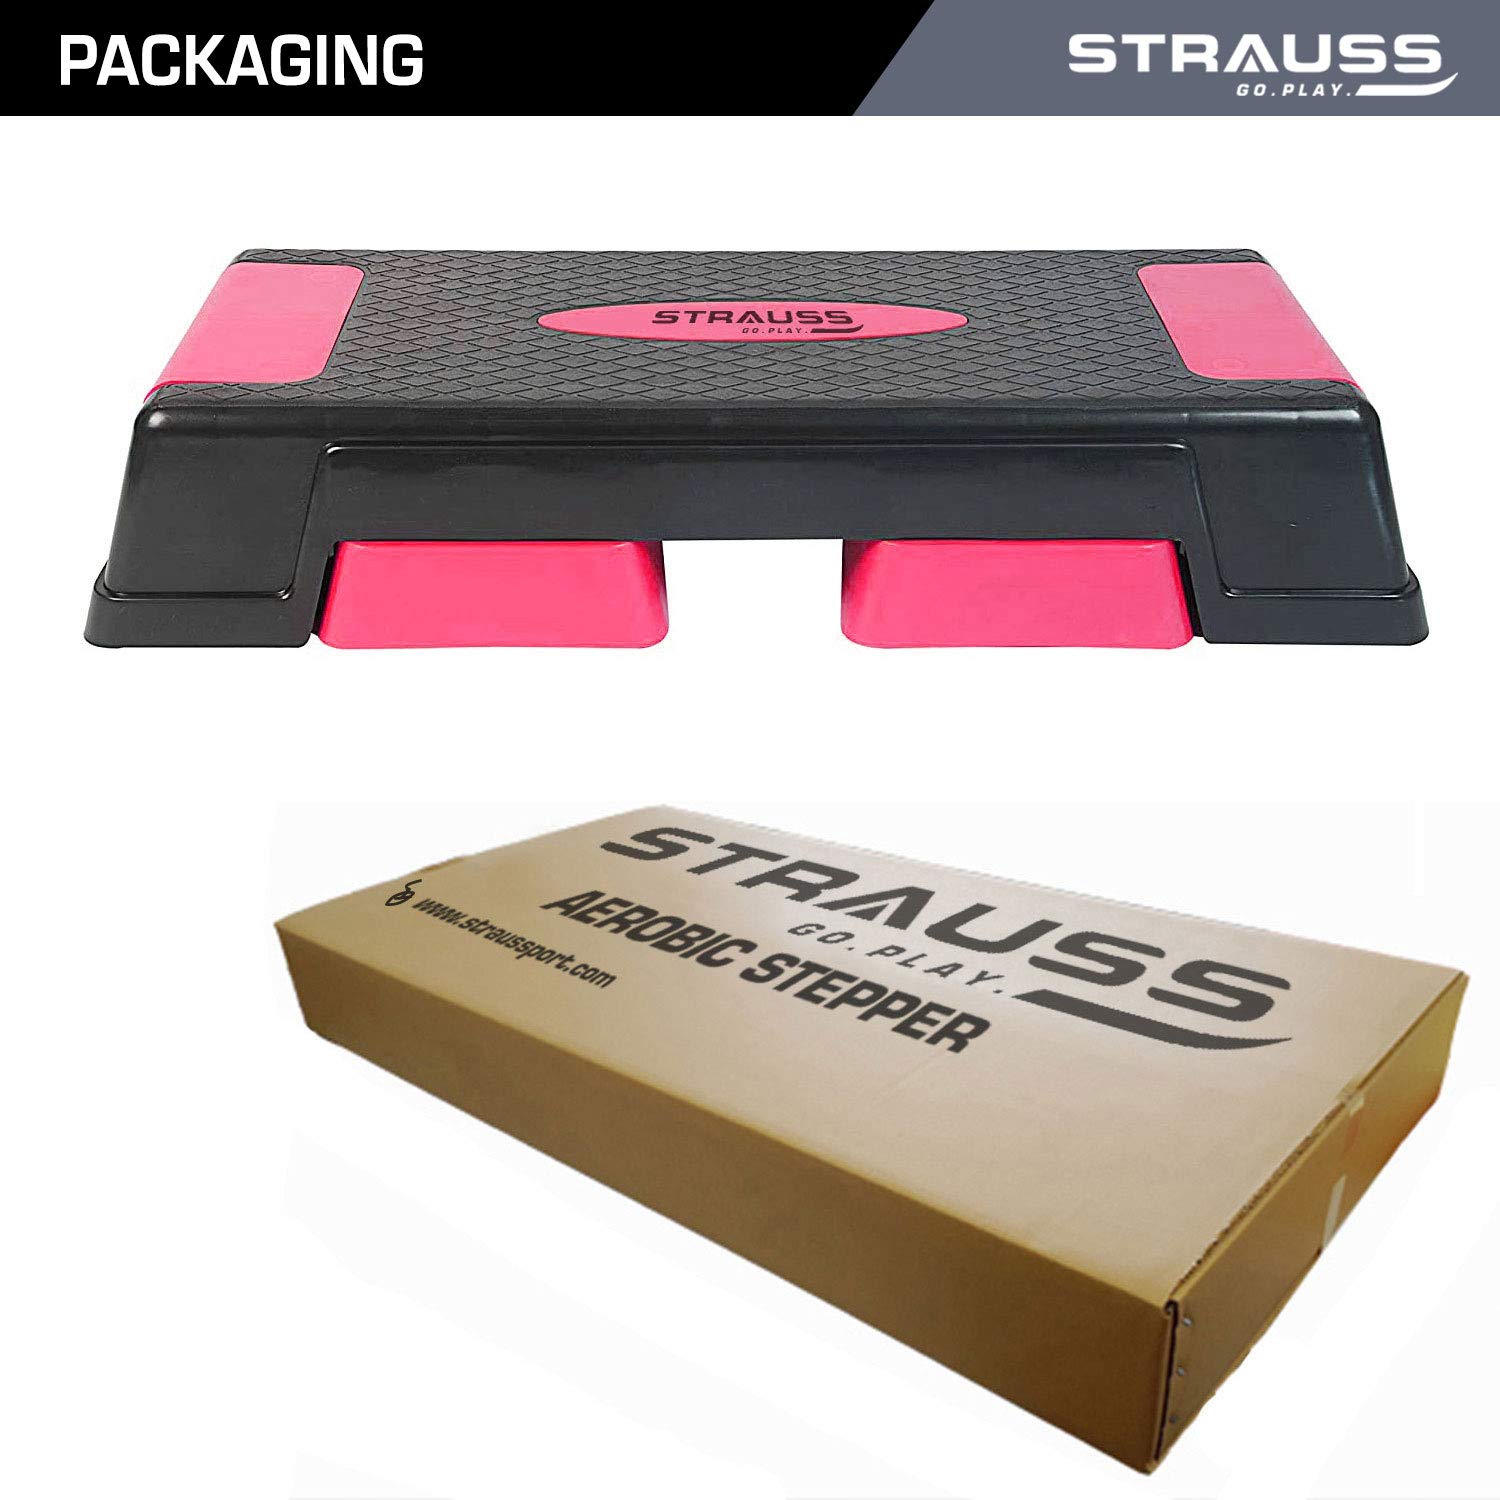 Strauss High Rise Aerobic Stepper | Two Height Level Adjustments - 6 inches and 8 inches | Slip-Resistant & Shock Absorbing Platform for Extra-Durability - Supports Upto 200 KG, (Pink)